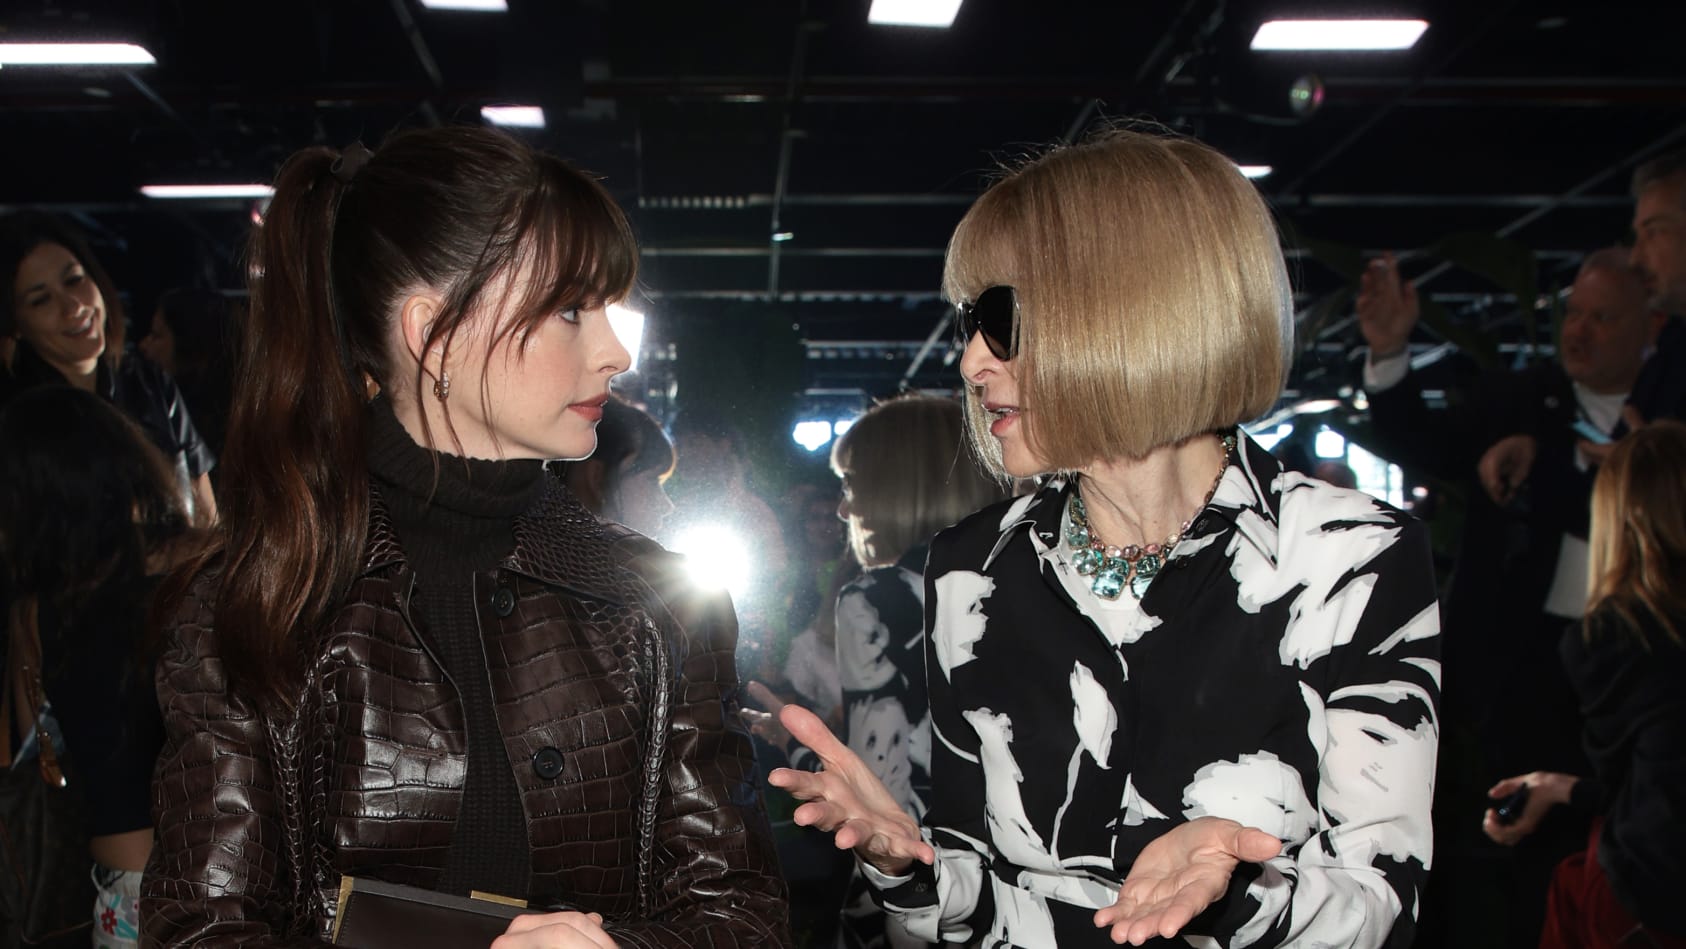 NEW YORK, NEW YORK - SEPTEMBER 14: (L-R) Anne Hathaway and Anna Wintour attend the Michael Kors Collection Spring/Summer 2023 Runway Show on September 14, 2022 in New York City. (Photo by Dimitrios Kambouris/Getty Images for Michael Kors)